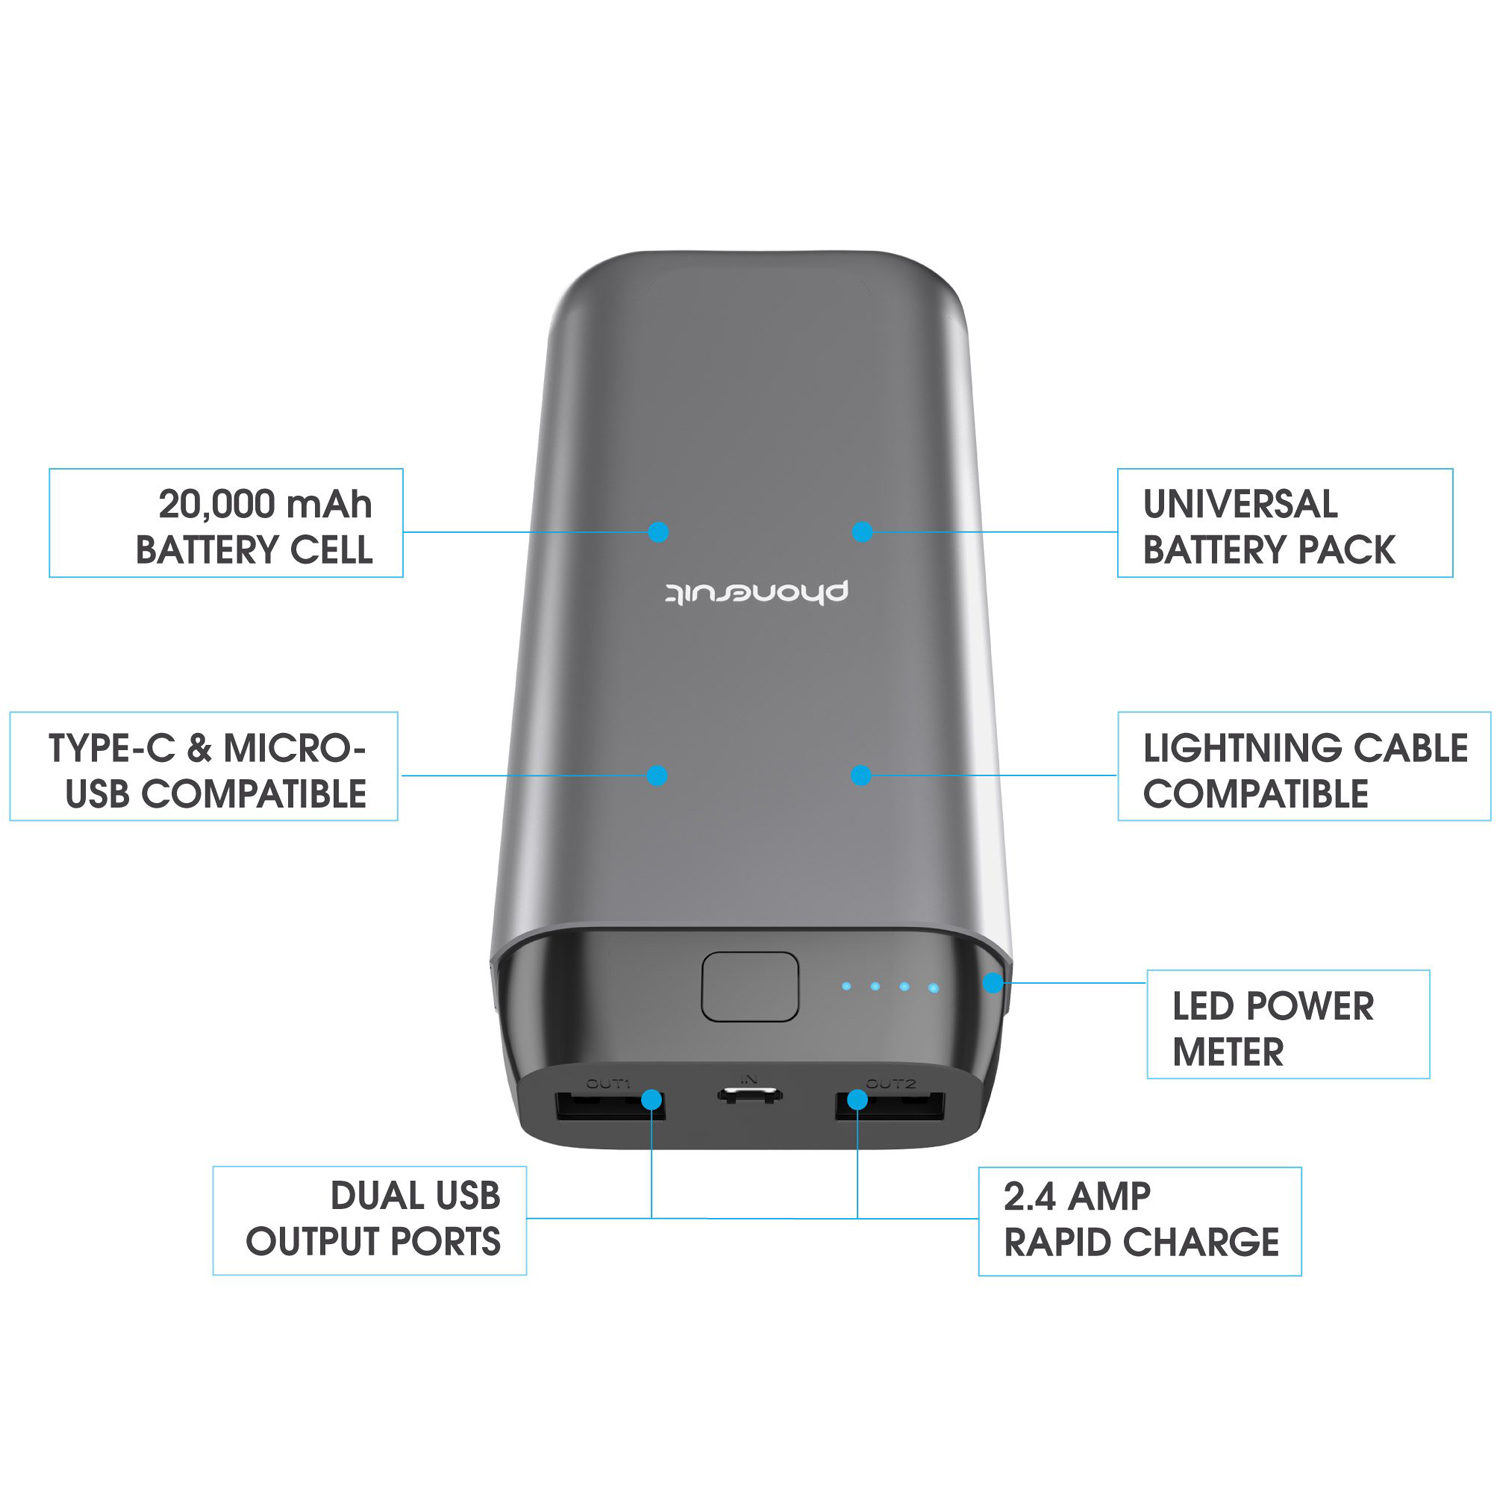 PhoneSuit Energy Core Max Power Bank 20,000mAh for iPhone, SAMSUNG and More - image 2 of 6